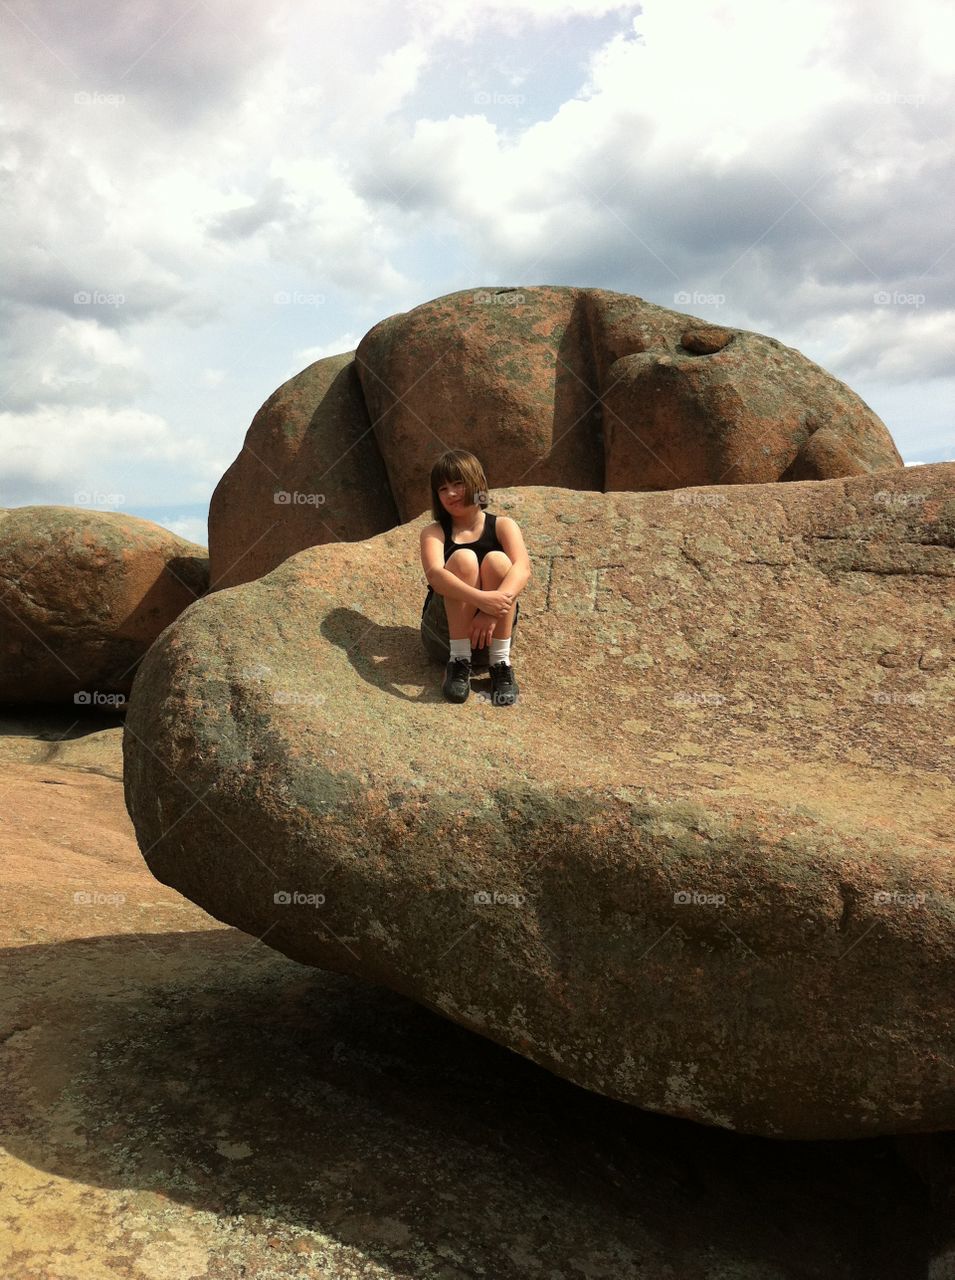 Ember. My daughter at Elephant Rocks State Park in Missouri 